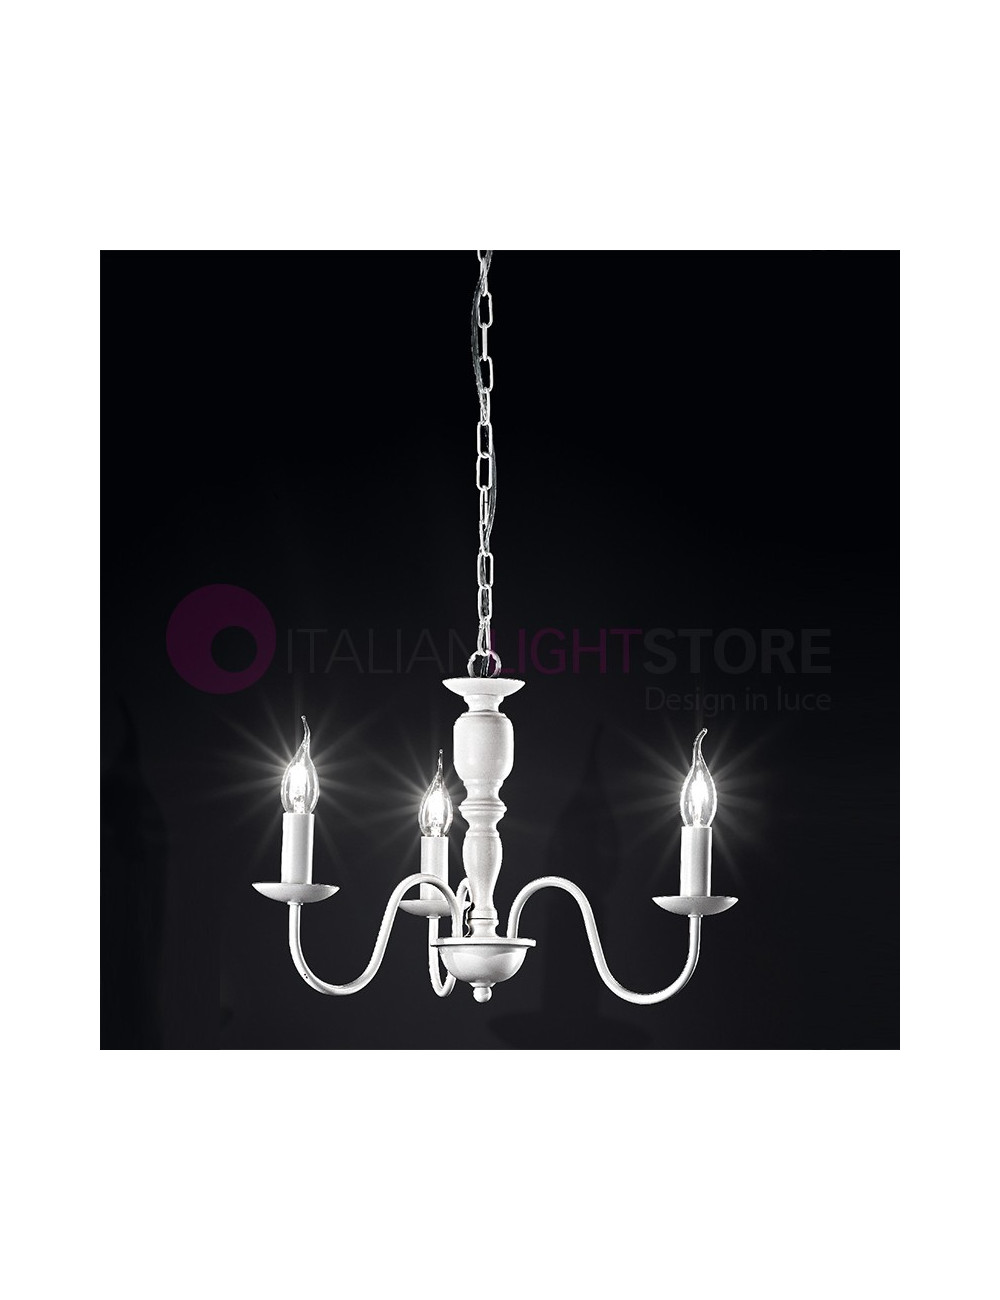 CHARME WHITE Classic chandelier 3 lights Flemish style Rustic Country